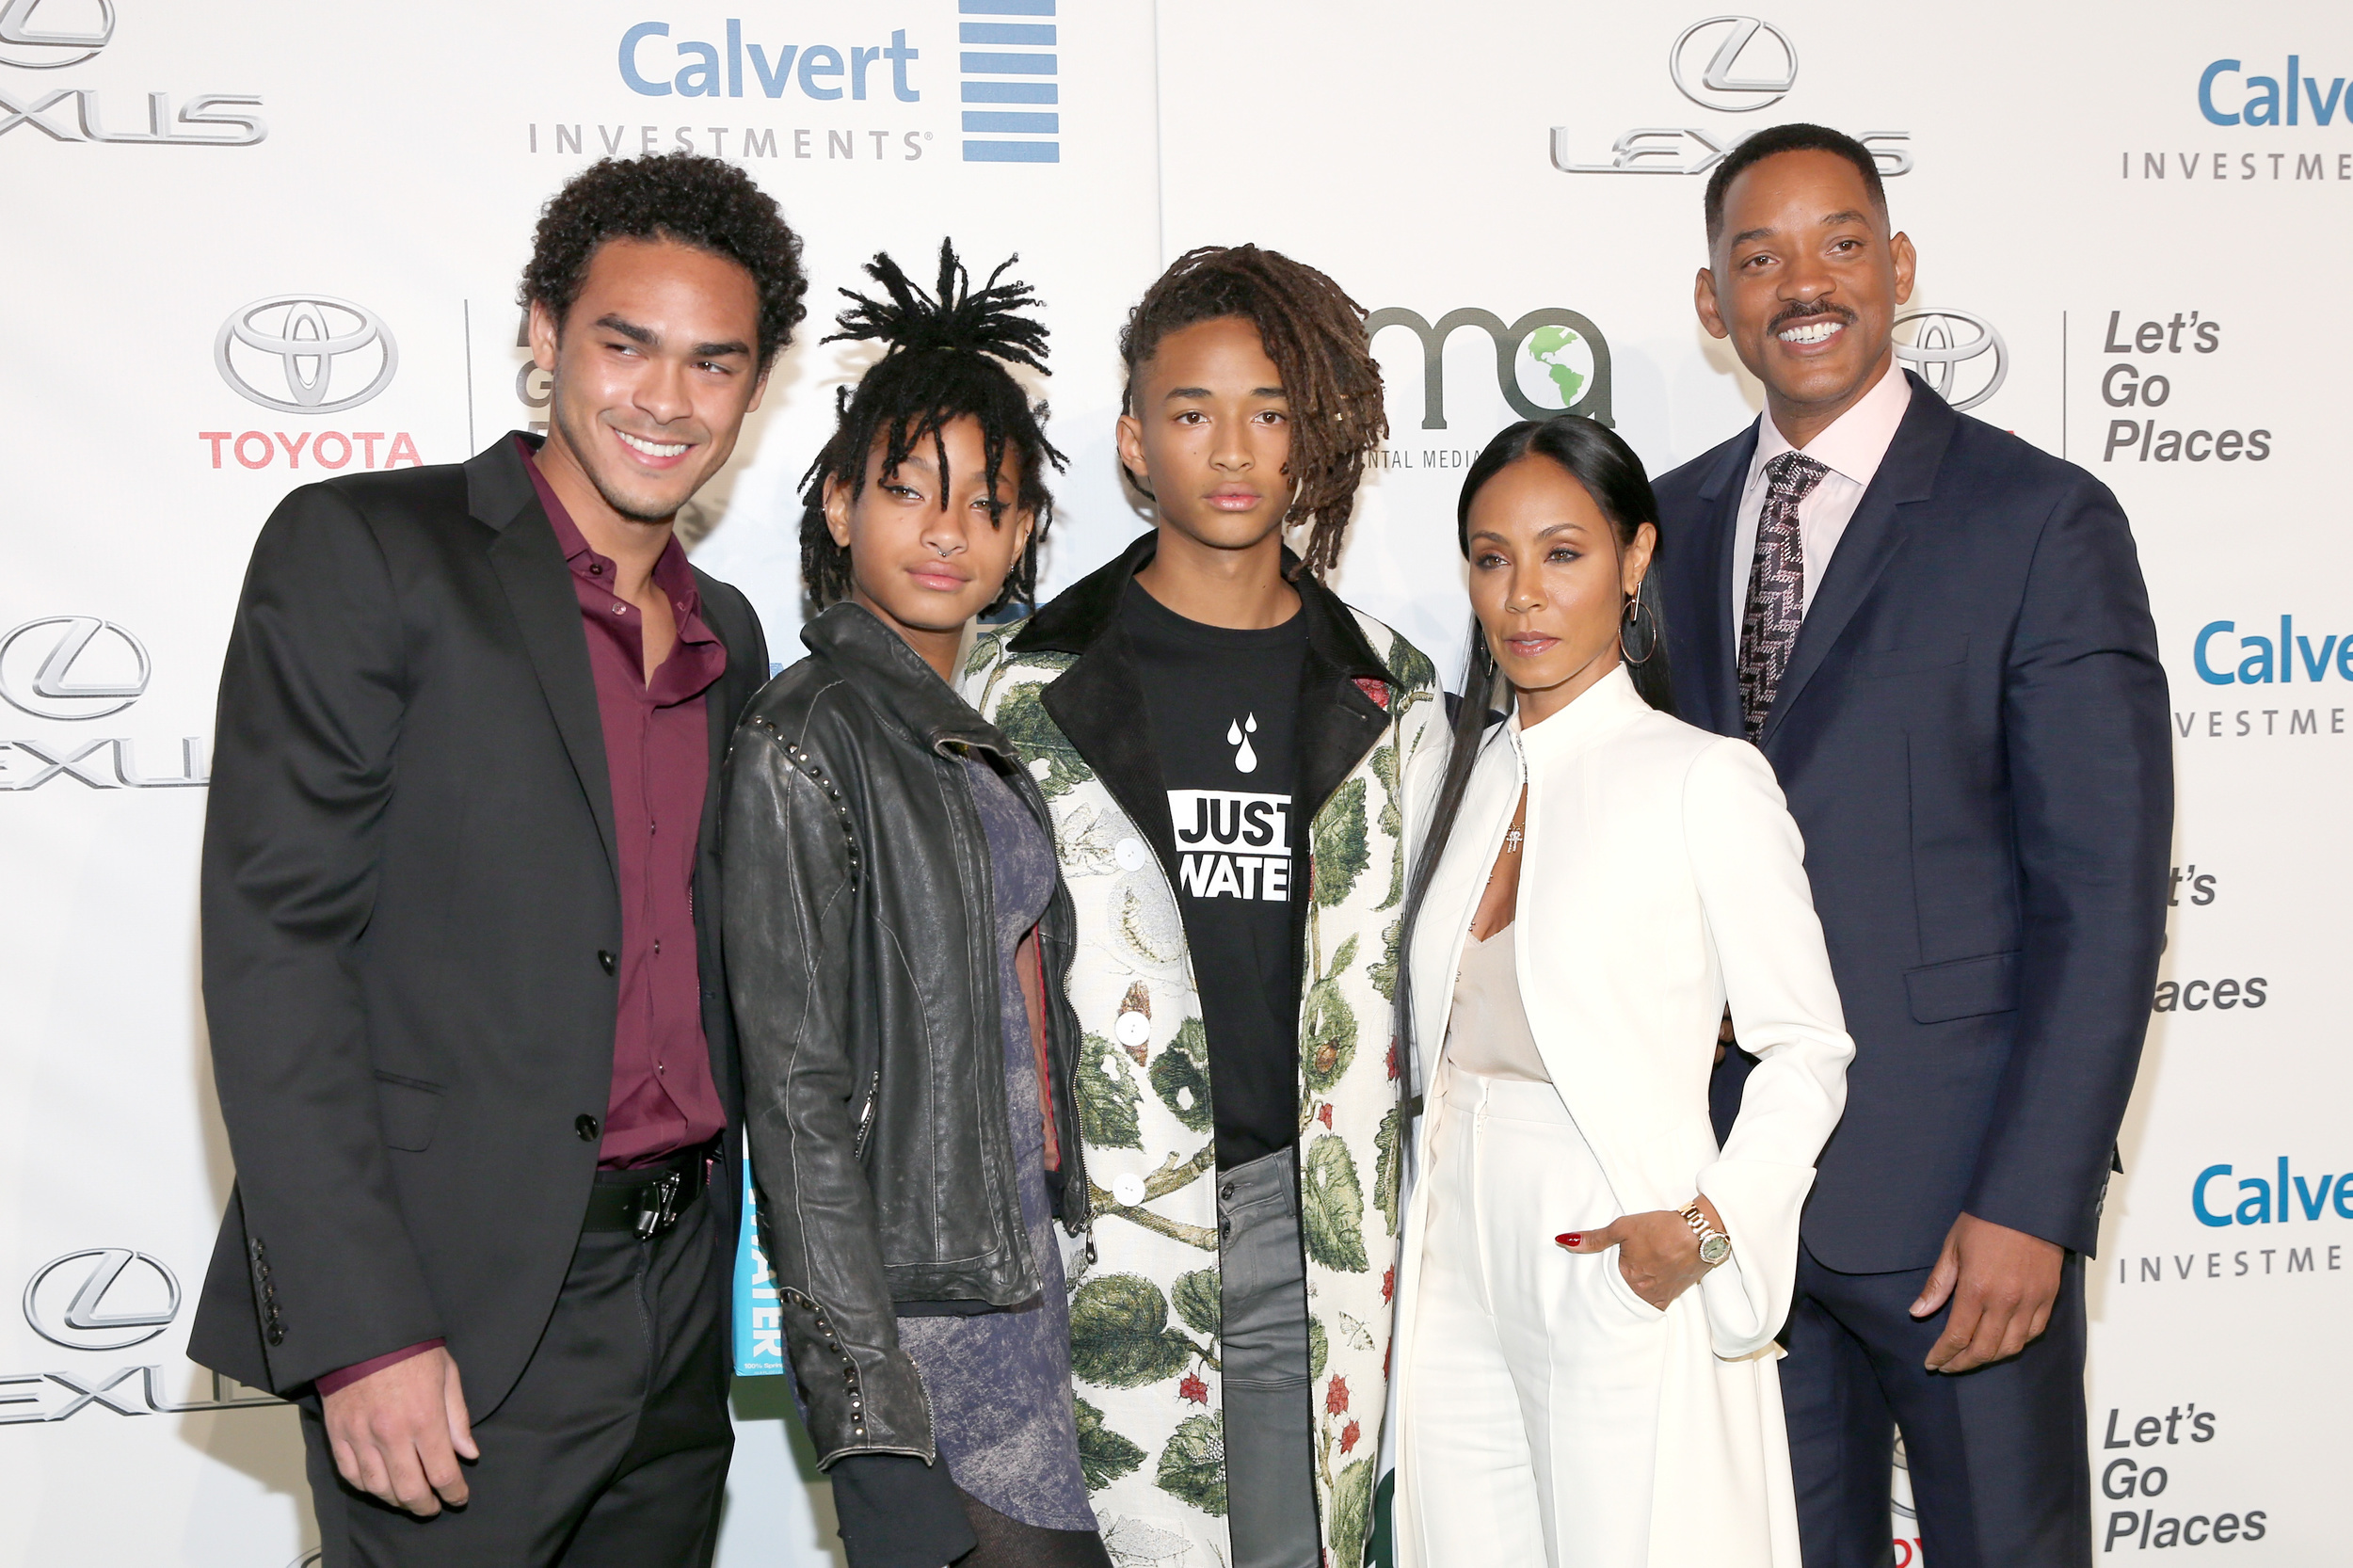 <p>With Will Smith (<em>The Fresh Prince of Bel-Air, Independence Day, Men in Black</em>) and Jada Pinkett <em>(</em><em>A Different World, The Nutty Professor</em>), it would be odd if the Smith children did not have entertainment in their blood. Jaden (<em>The Karate Kid</em>, <em>Life in a Year</em>) and Willow (<em>I Am Legend</em>) have followed in their parents' footsteps when it comes to balancing acting and music, though both tend to lean more toward music. </p><p>You may also like: <a href='https://www.yardbarker.com/entertainment/articles/20_facts_you_might_not_know_about_pulp_fiction/s1__35170955'>20 facts you might not know about 'Pulp Fiction'</a></p>